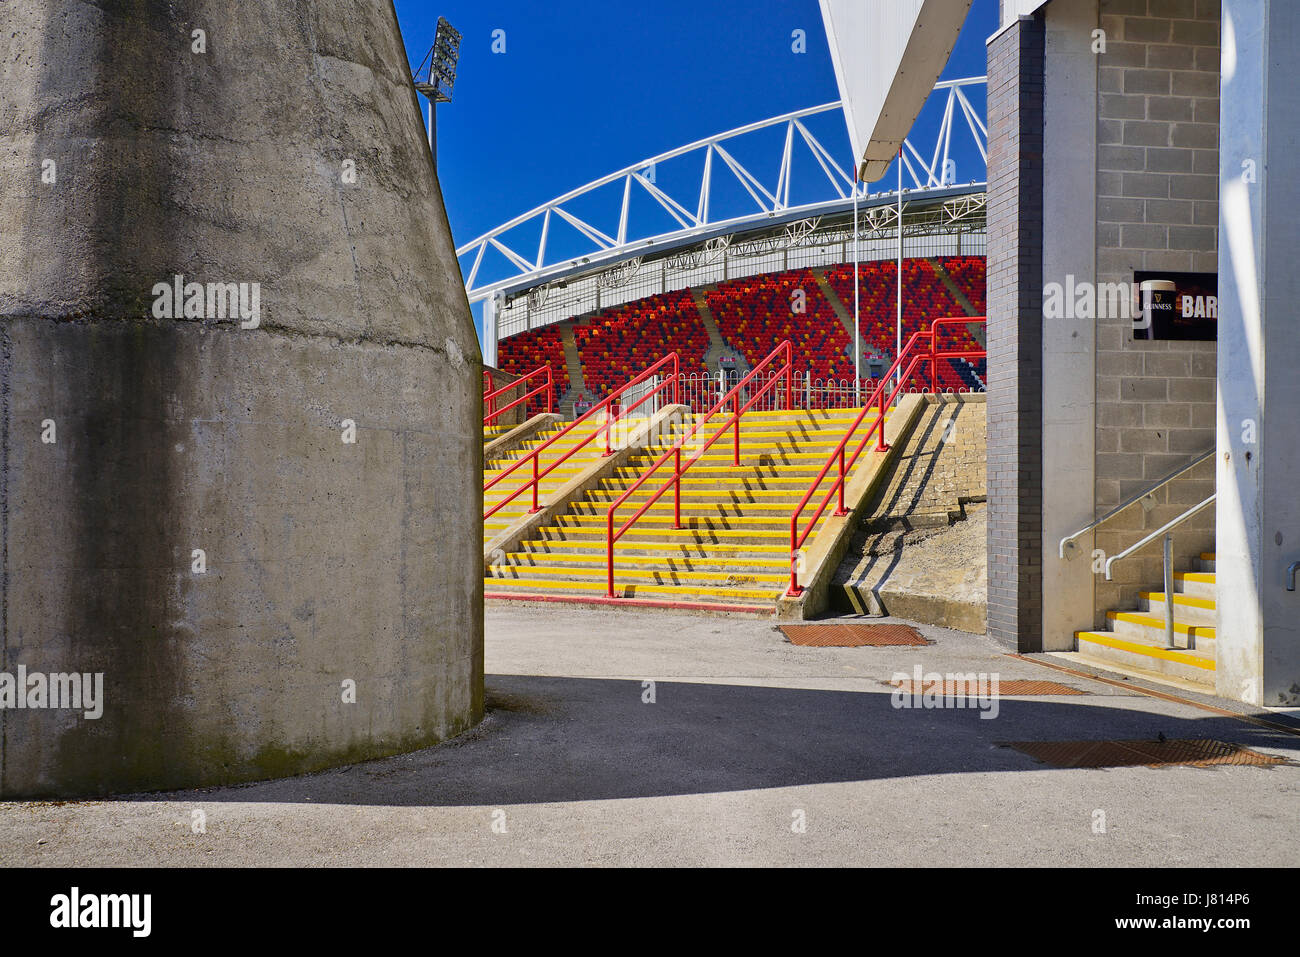 Ireland, County Limerick, Limerick City, Thomond Park Rugby Football Ground, Seating in the stand. Stock Photo